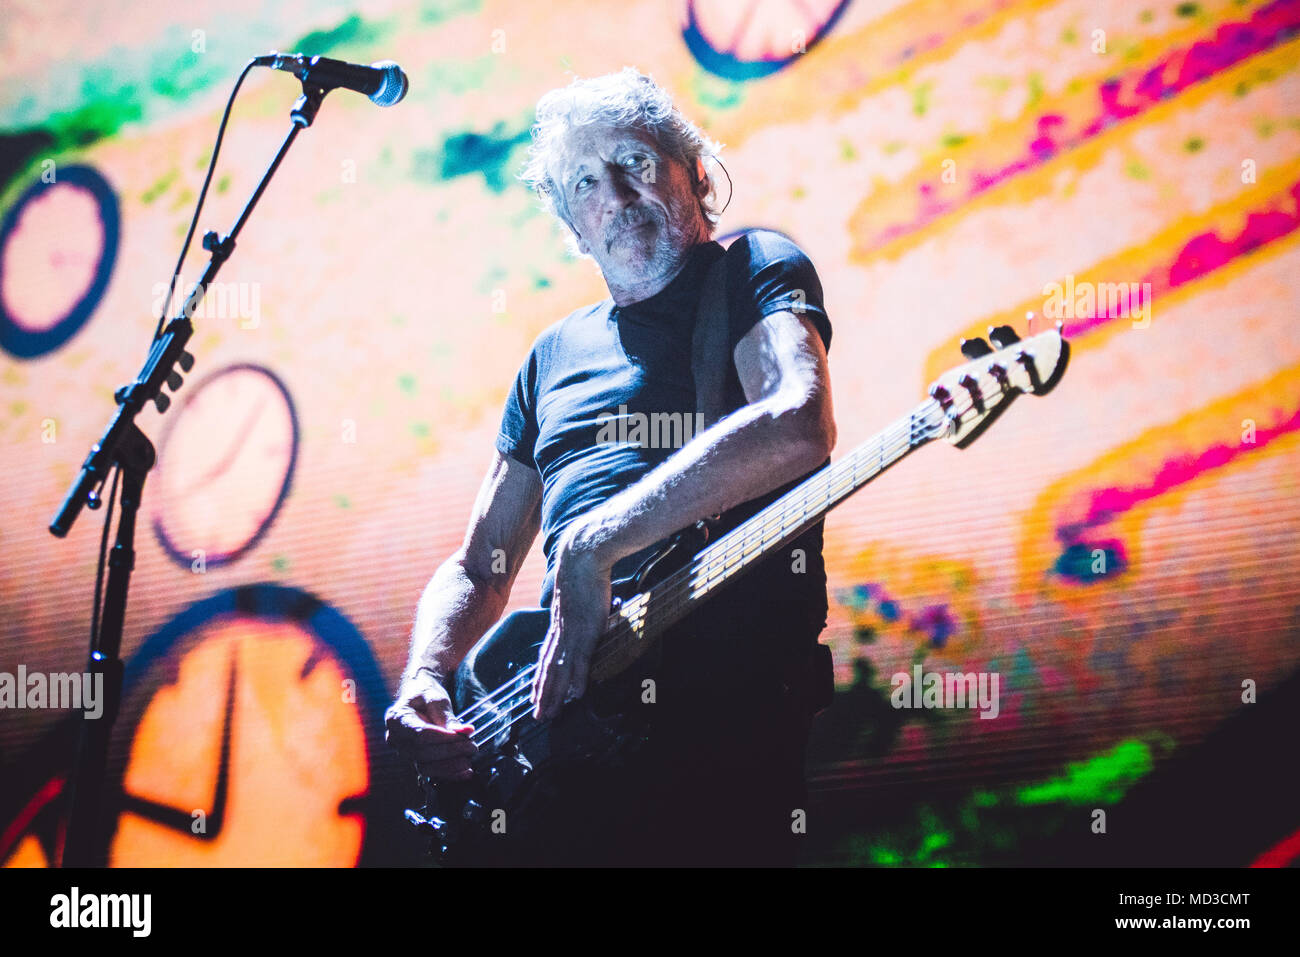 Milan, Italy. 17th Apr, 2018. The music legend, singer and song writer, Roger Waters Performing live on stage at the Assago Forum in Milan for his first 'Us + Them' italian tour concert  Credit: Alessandro Bosio/Alamy Live News Stock Photo